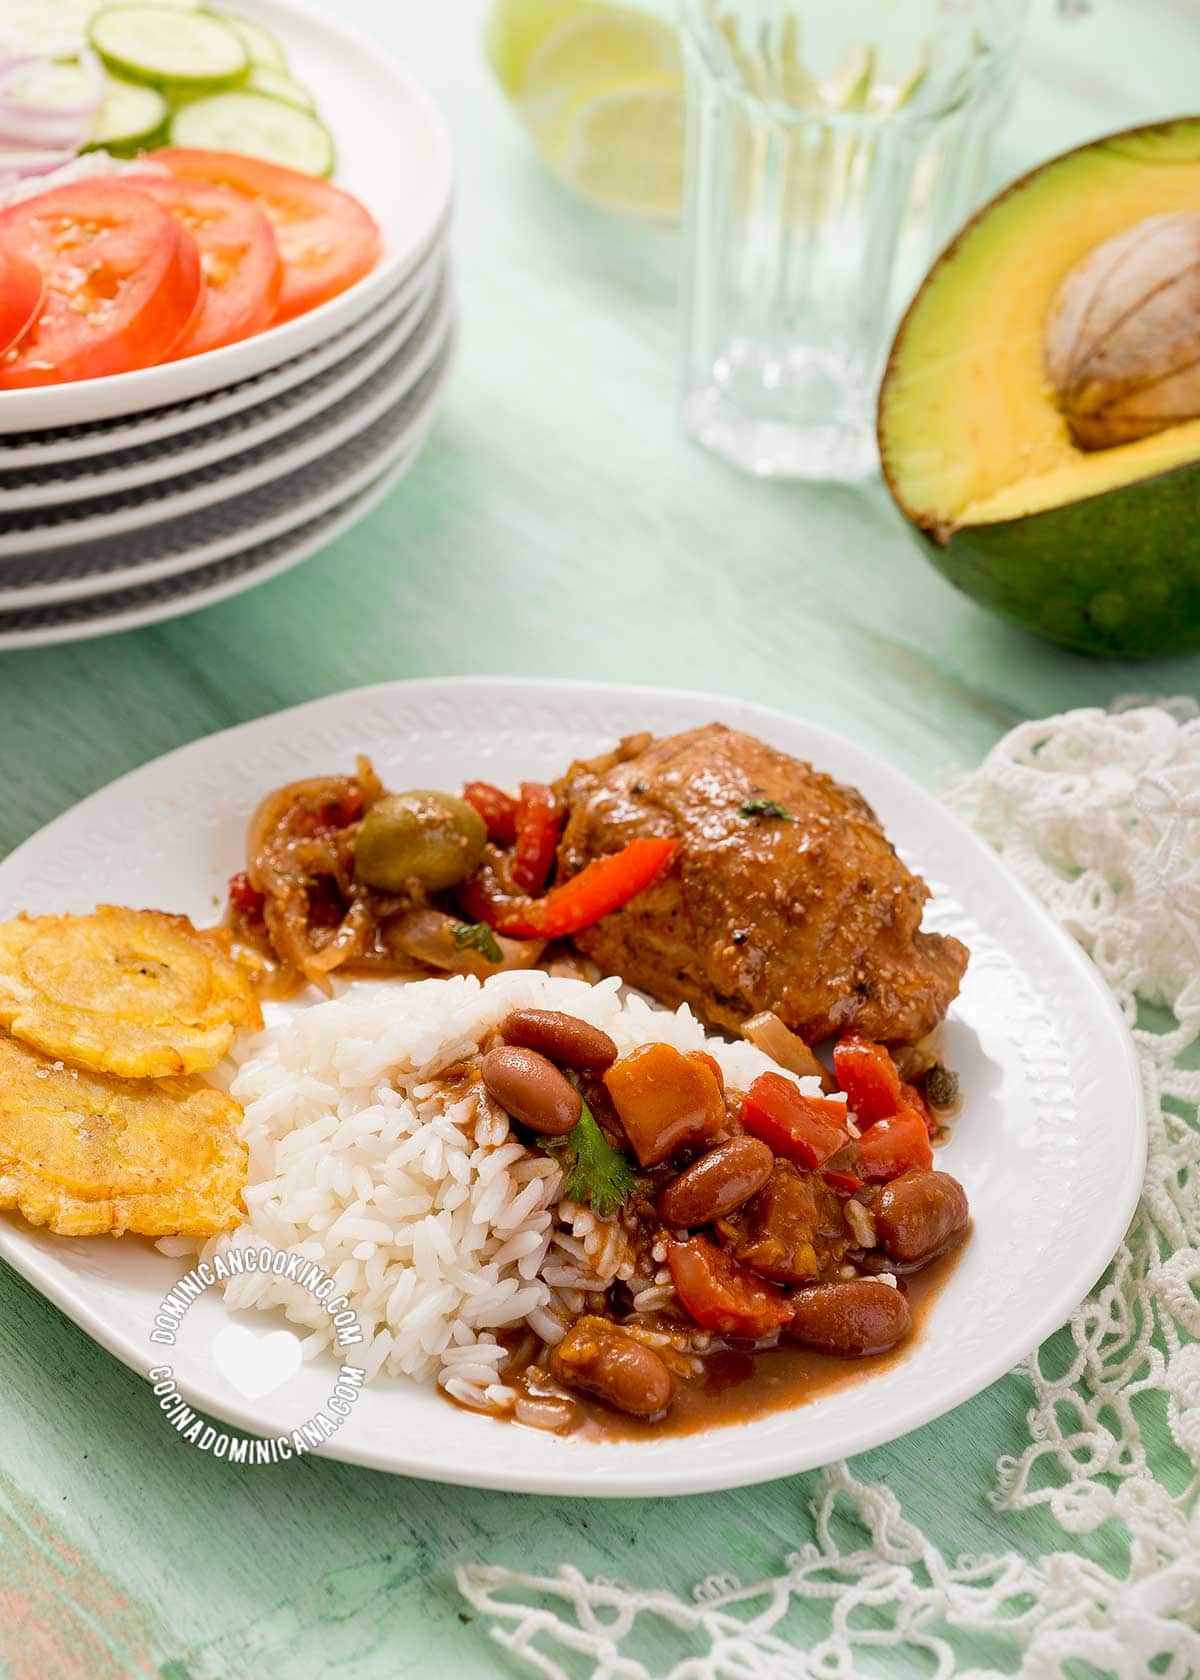 Dominican dish of rice, beans and chicken served with salad and avocado.